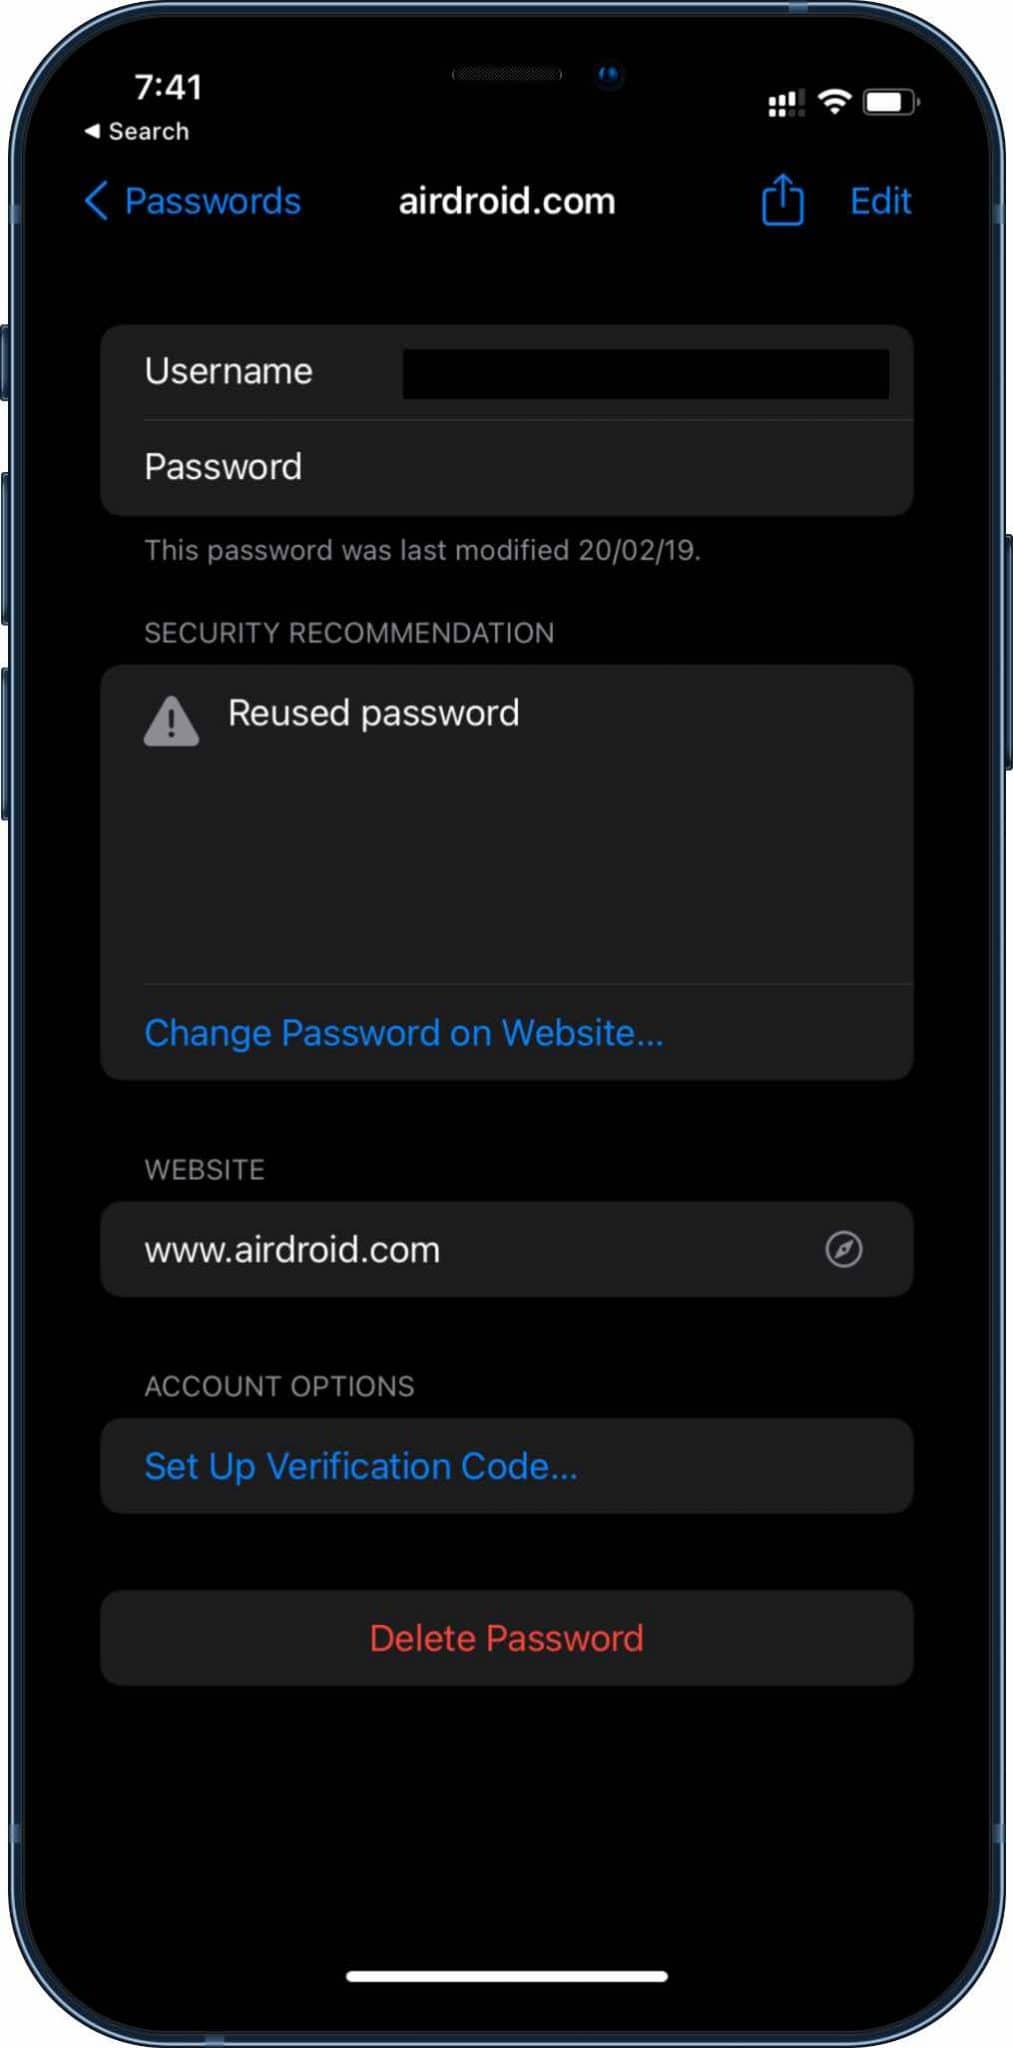 authenticator in iCloud keychain in iOS 15